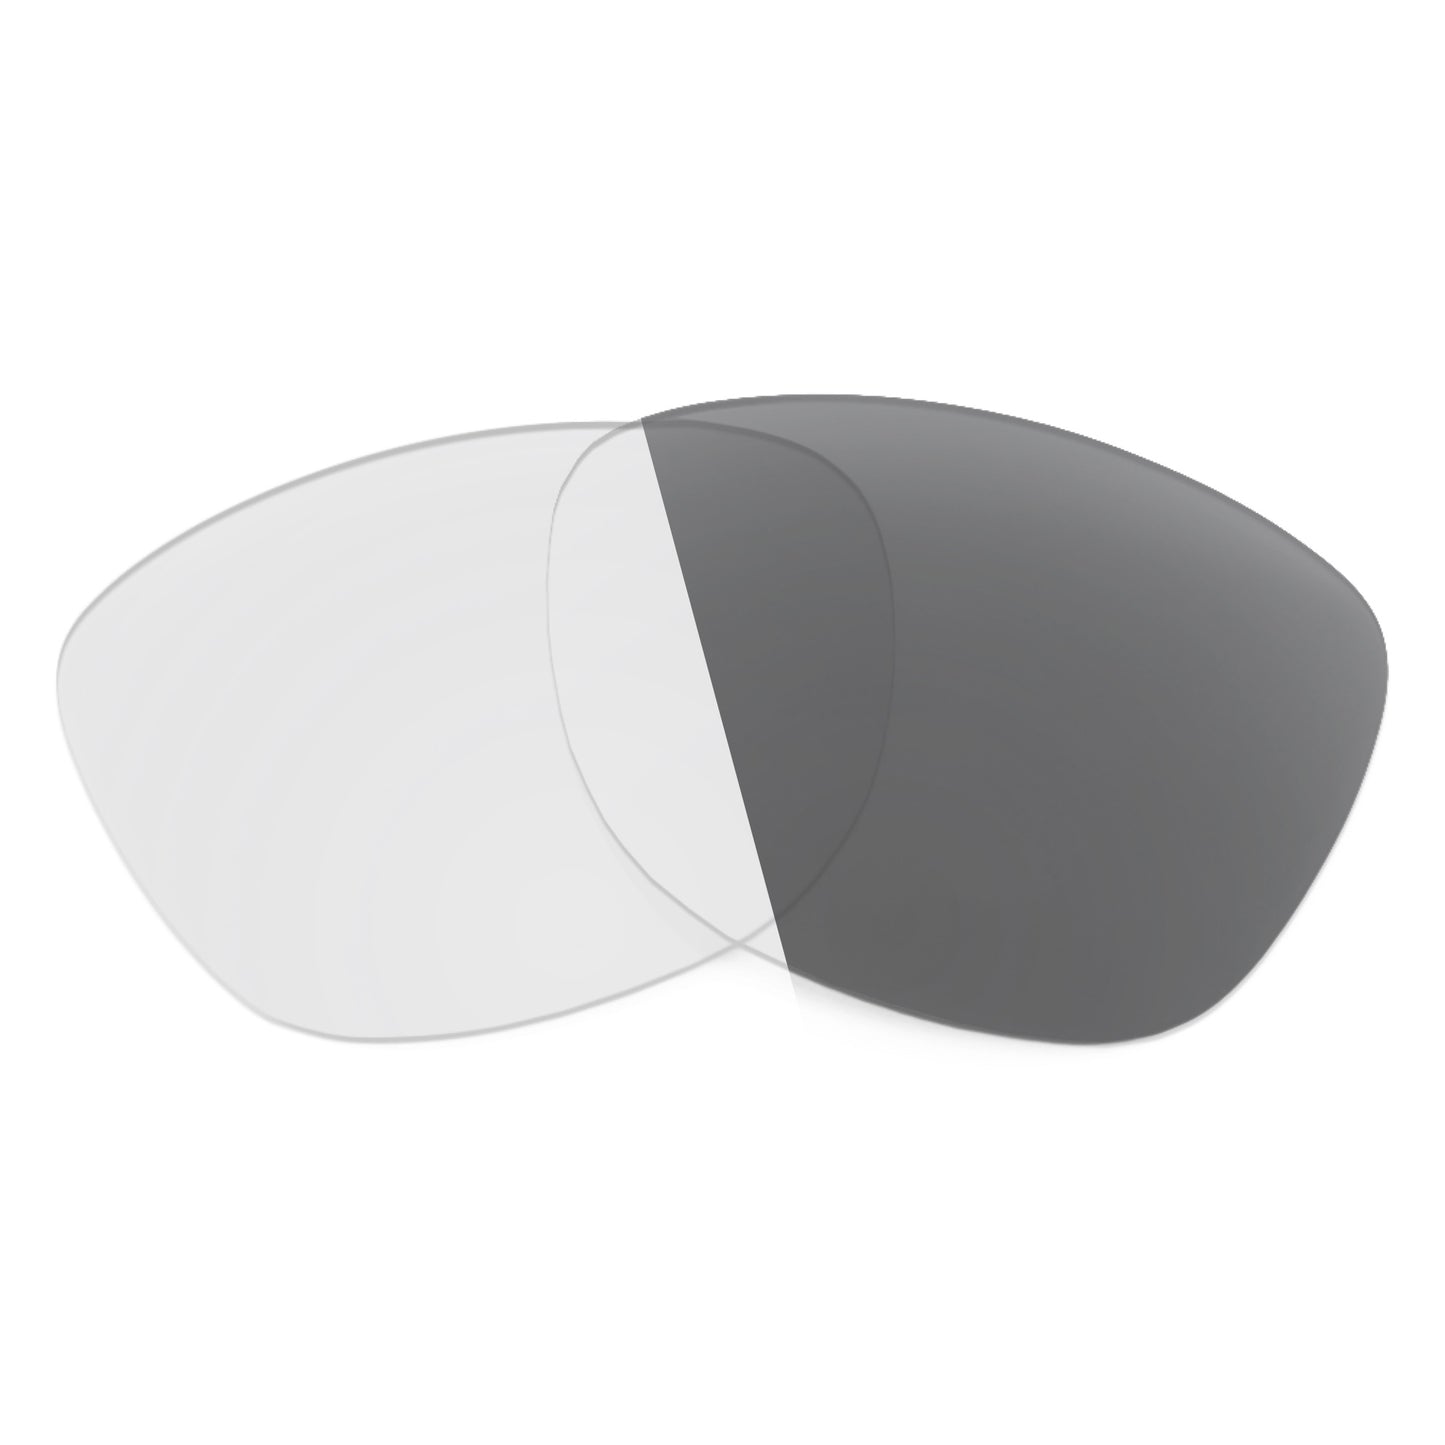 Revant replacement lenses for Oakley Frogskins (Low Bridge Fit) Non-Polarized Adapt Gray Photochromic